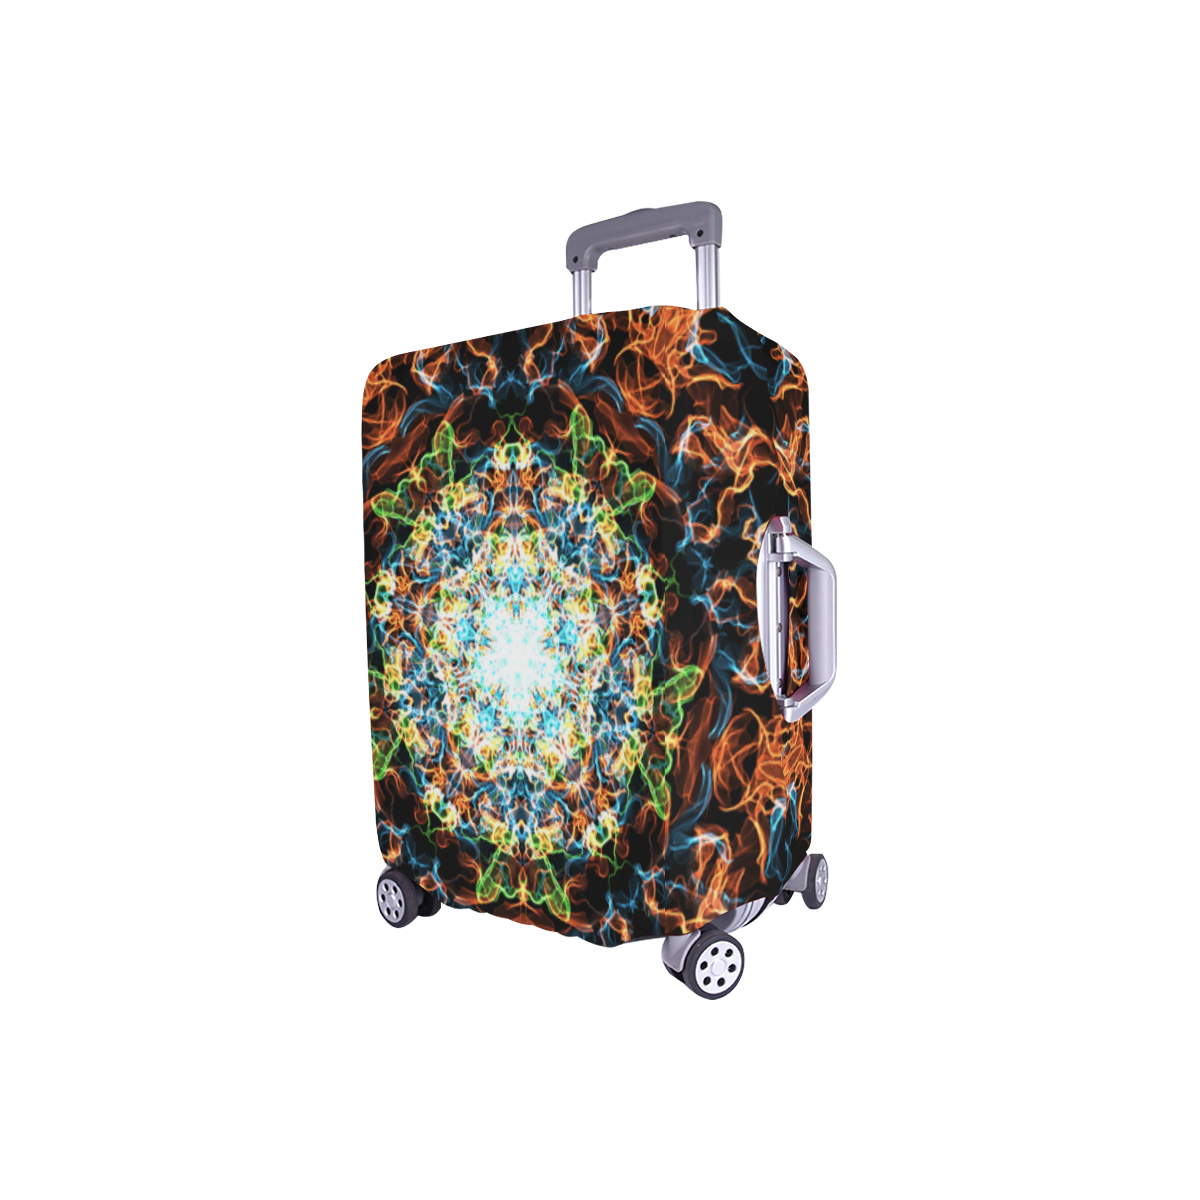 1 Luggage Cover/Small 18"-21"